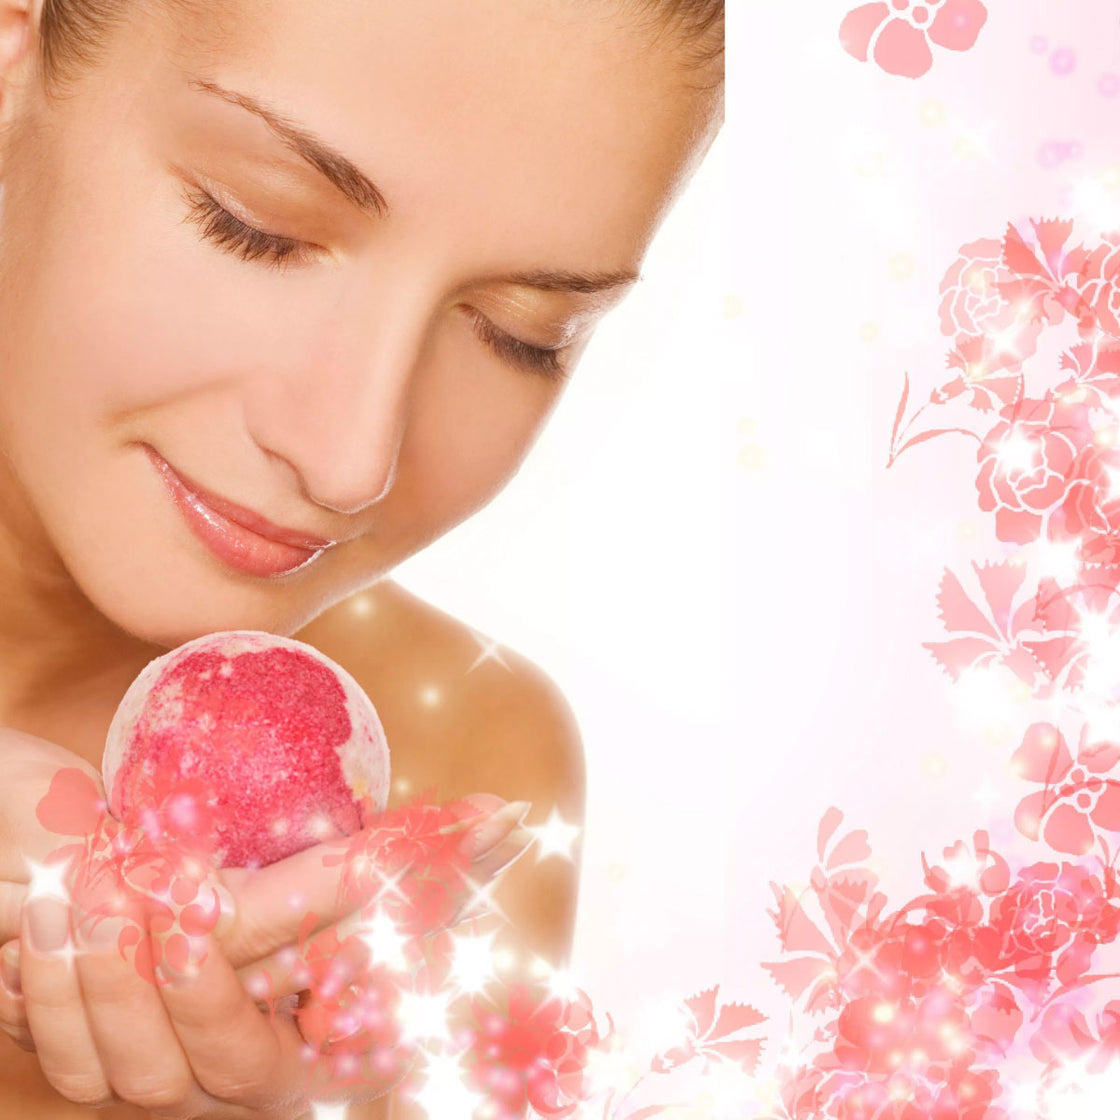 woman holding a pink and white colored bath bomb appearing to enjoy the fragrance - with pink flower and star pattern in the background